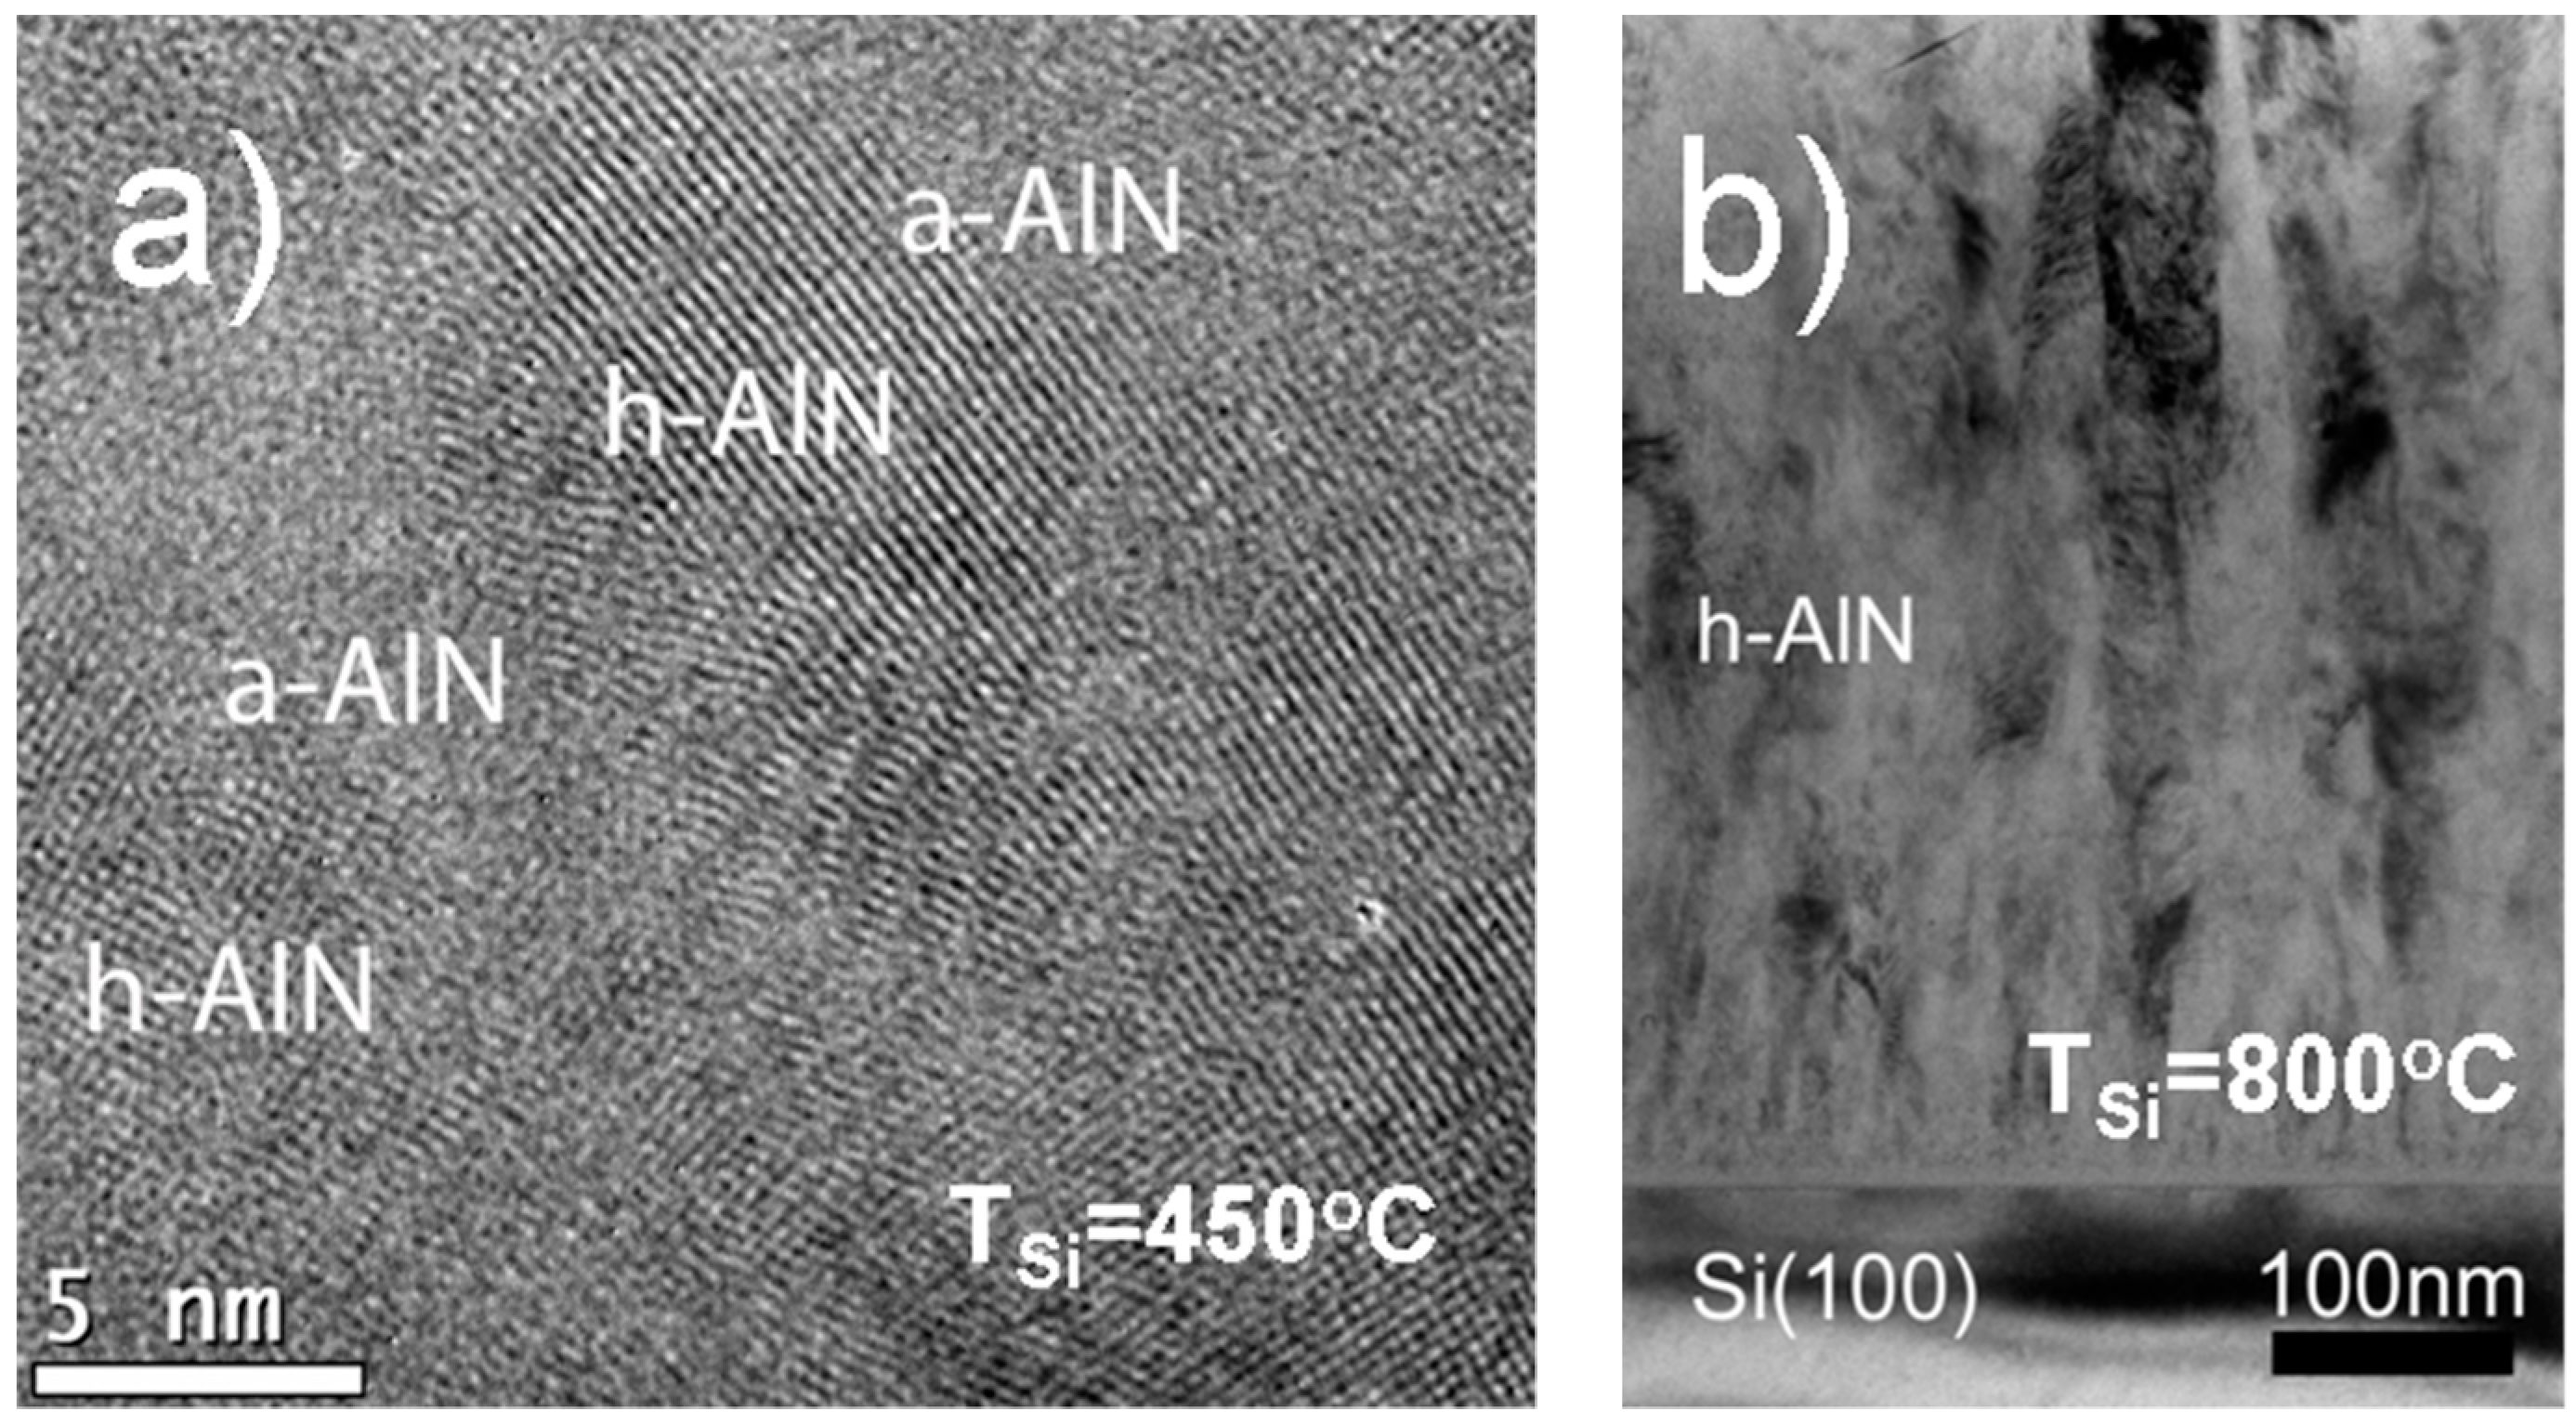 Coatings Free Full Text Pulsed Laser Deposition Of Aluminum Nitride Films Correlation Between Mechanical Optical And Structural Properties Html